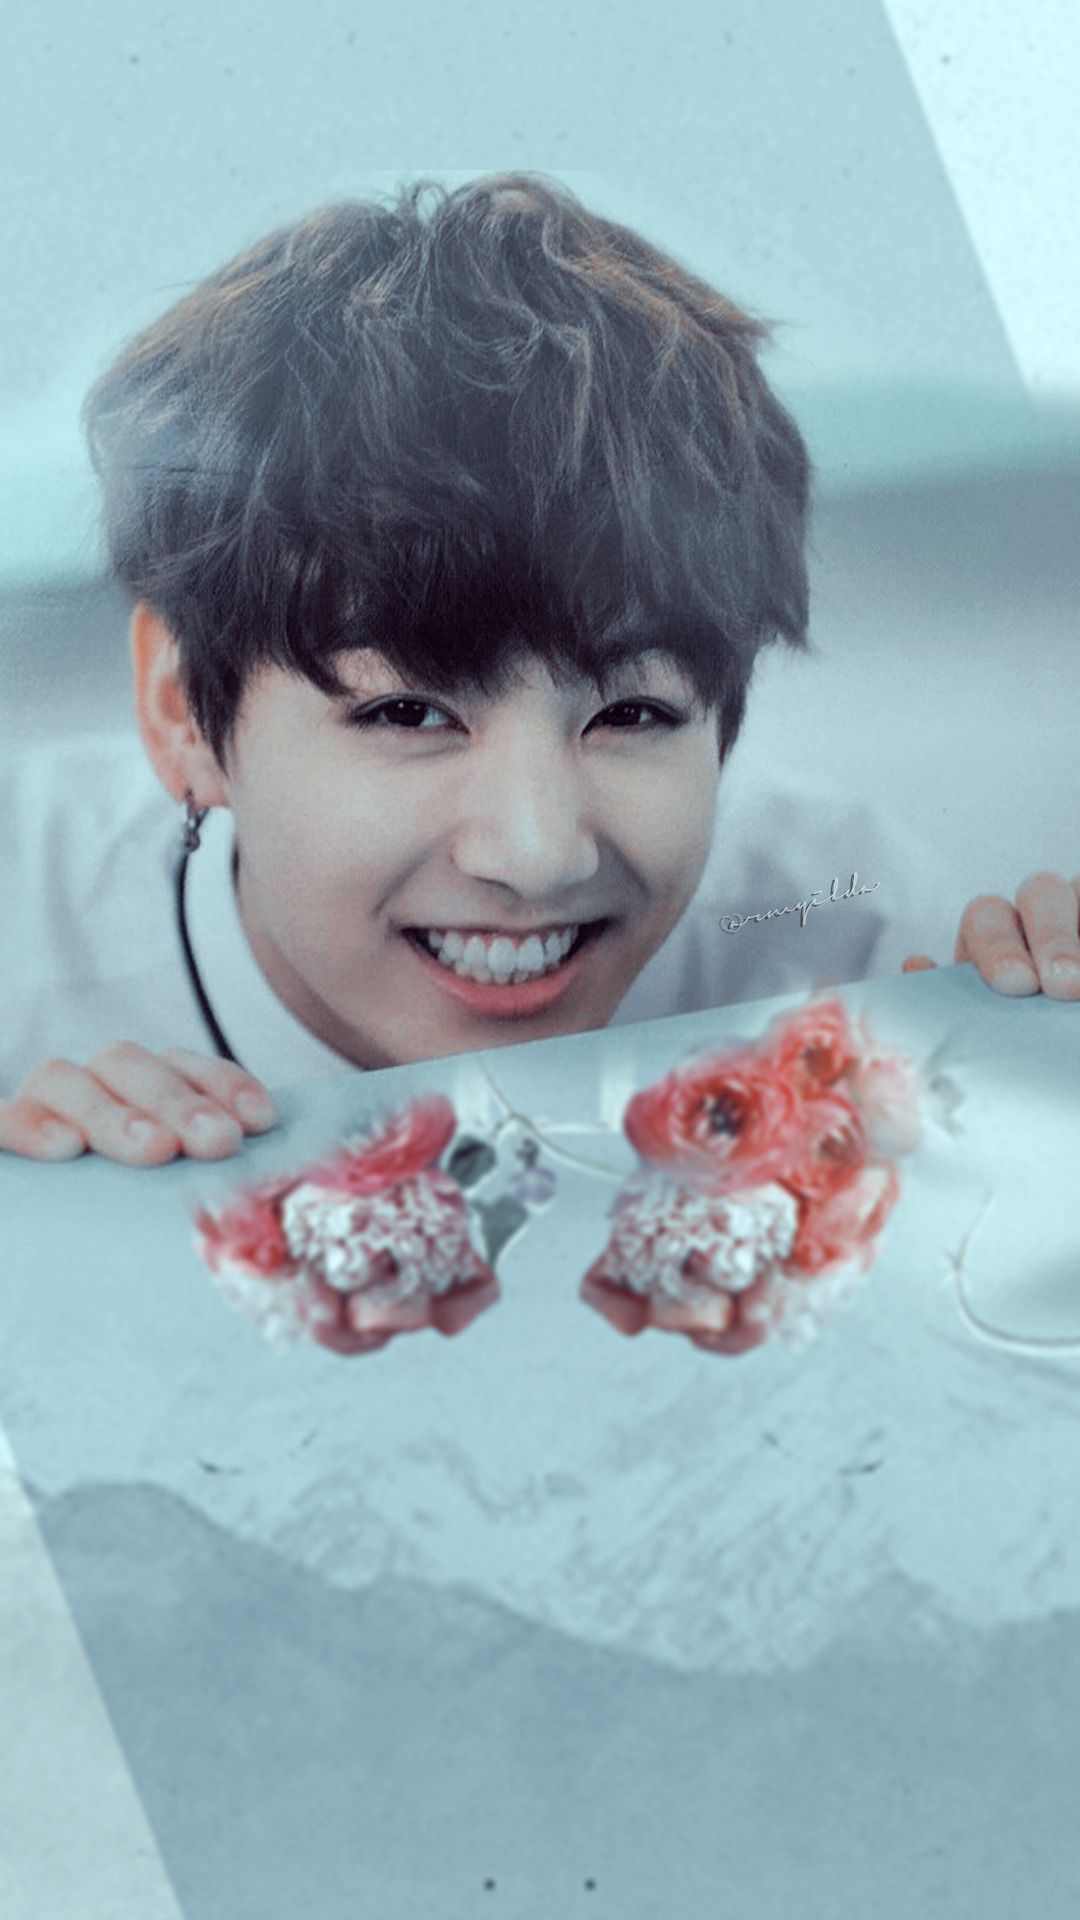 BTS Jungkook FREE Pictures on GreePX 1080x1920